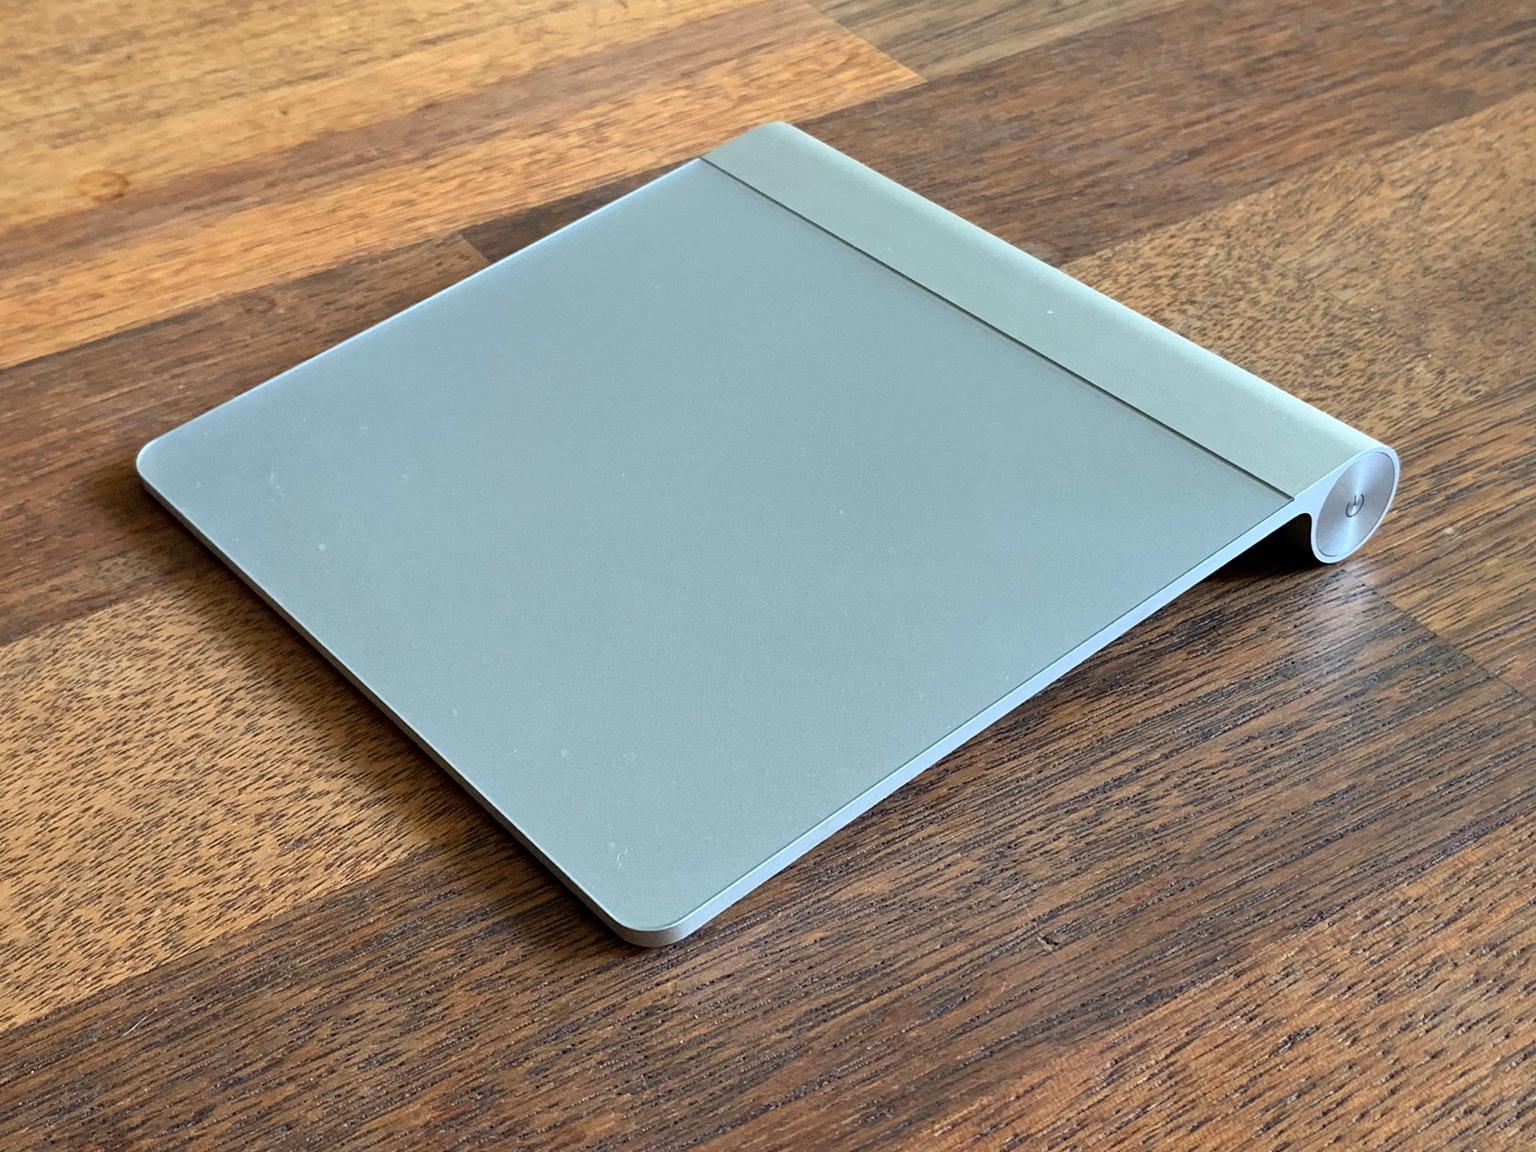 Apple magic trackpad in 11269 Stockholm for SEK 250.00 for sale 